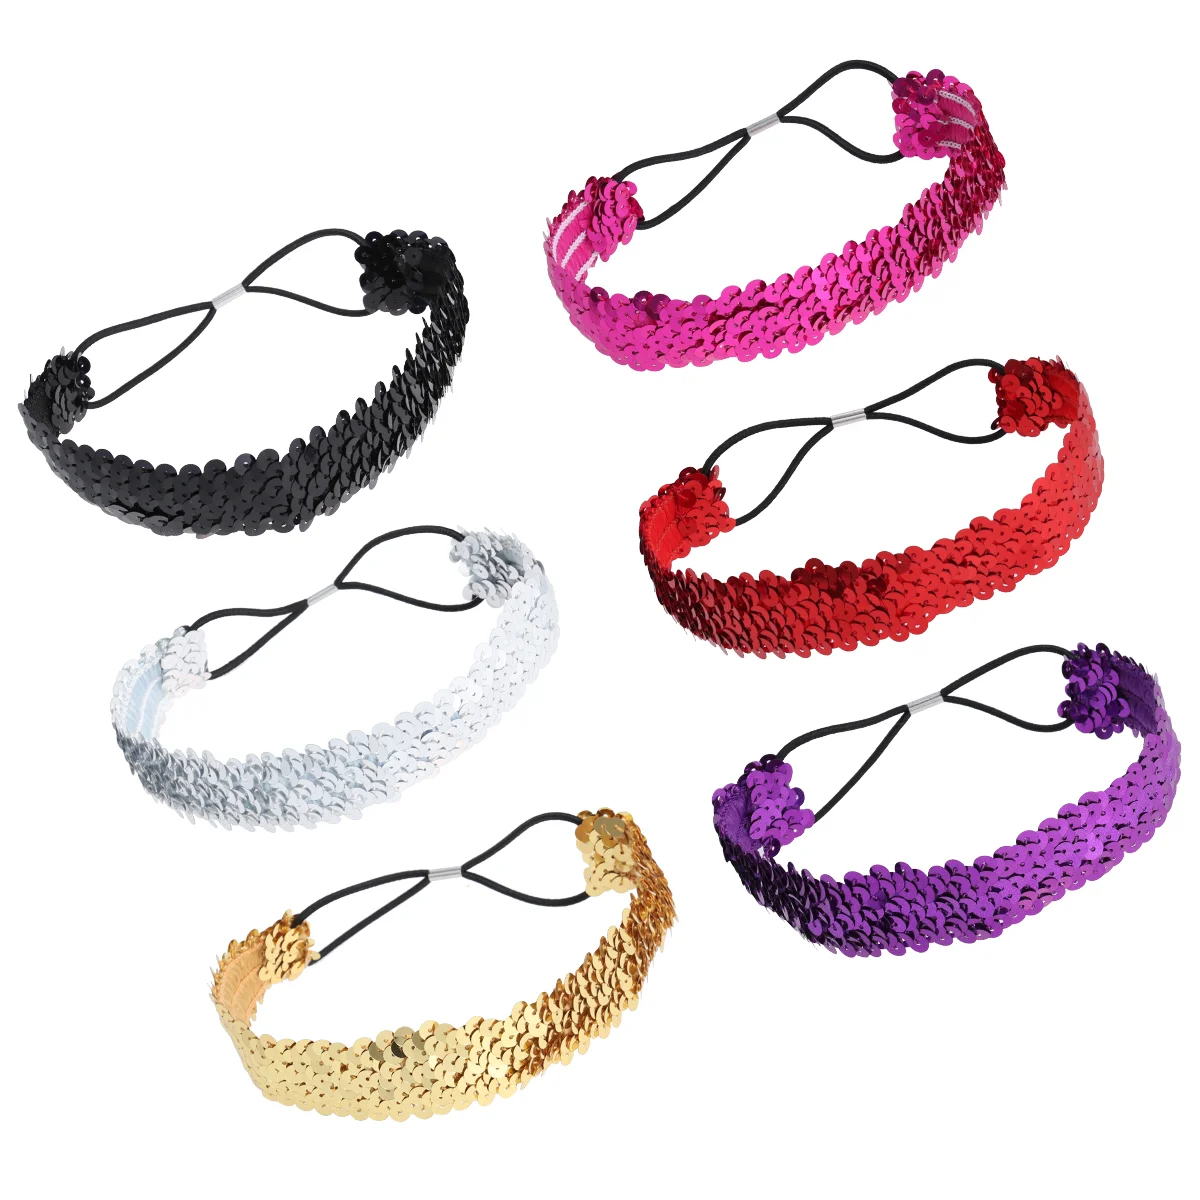 

6pcs Mermaid Sequin Headbands Reversible Shiny Hair Accessory with Elastic Cord for Women and Girls (Black + Silver + Gold +